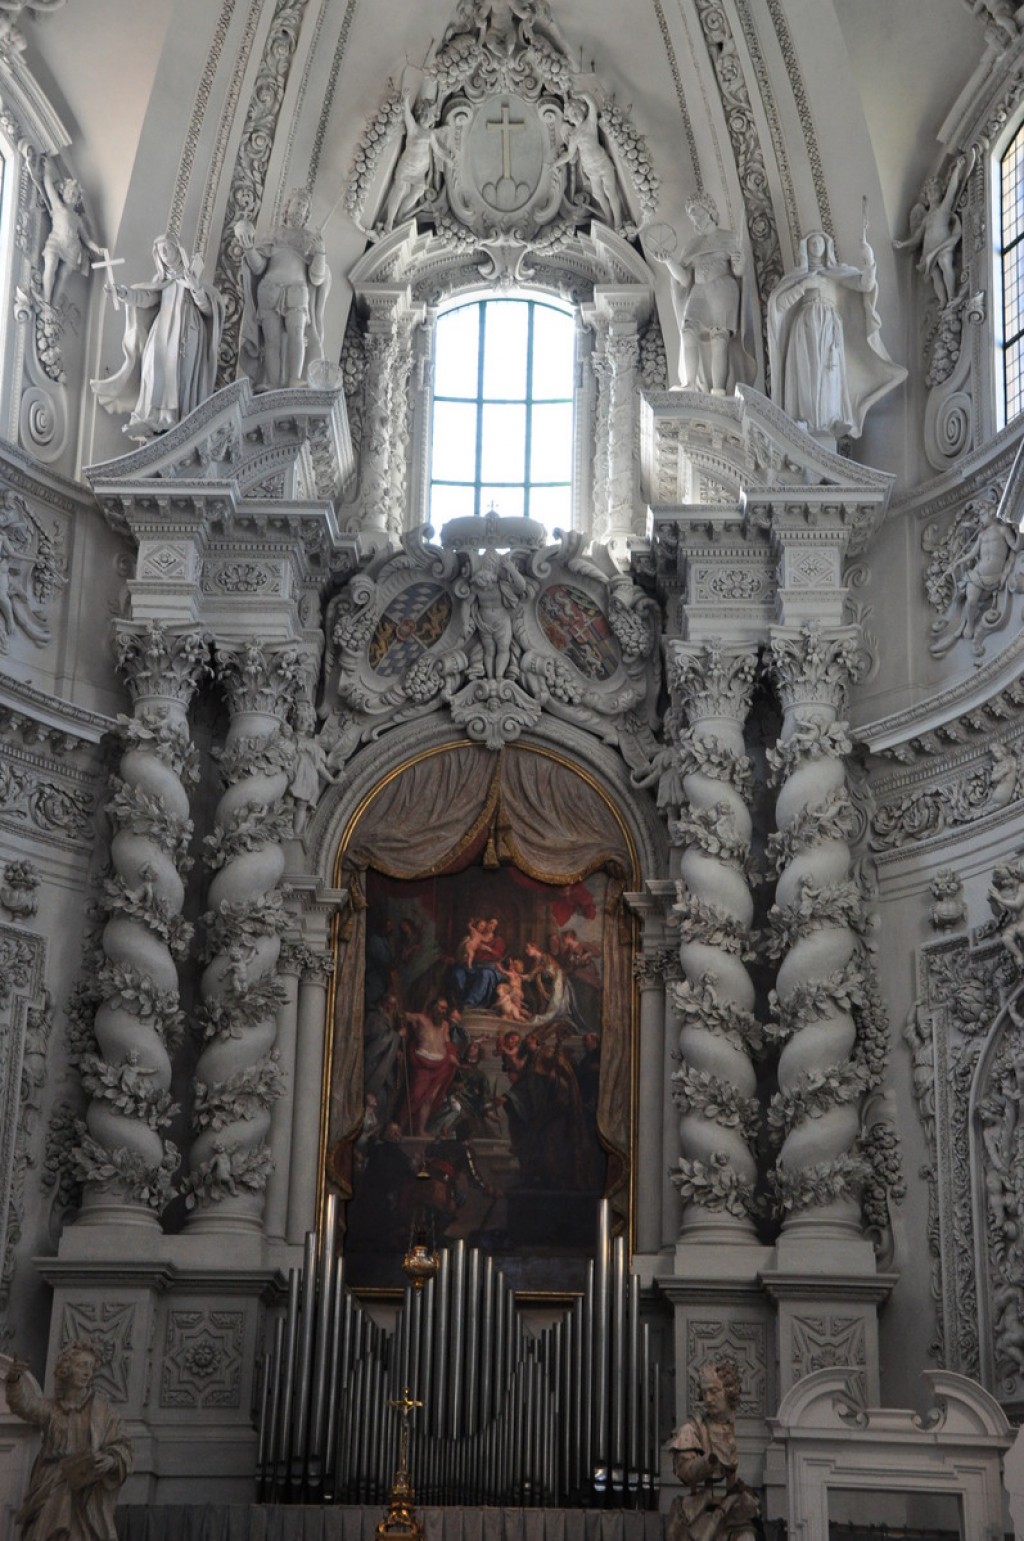 Inside the Theatiner Kirche